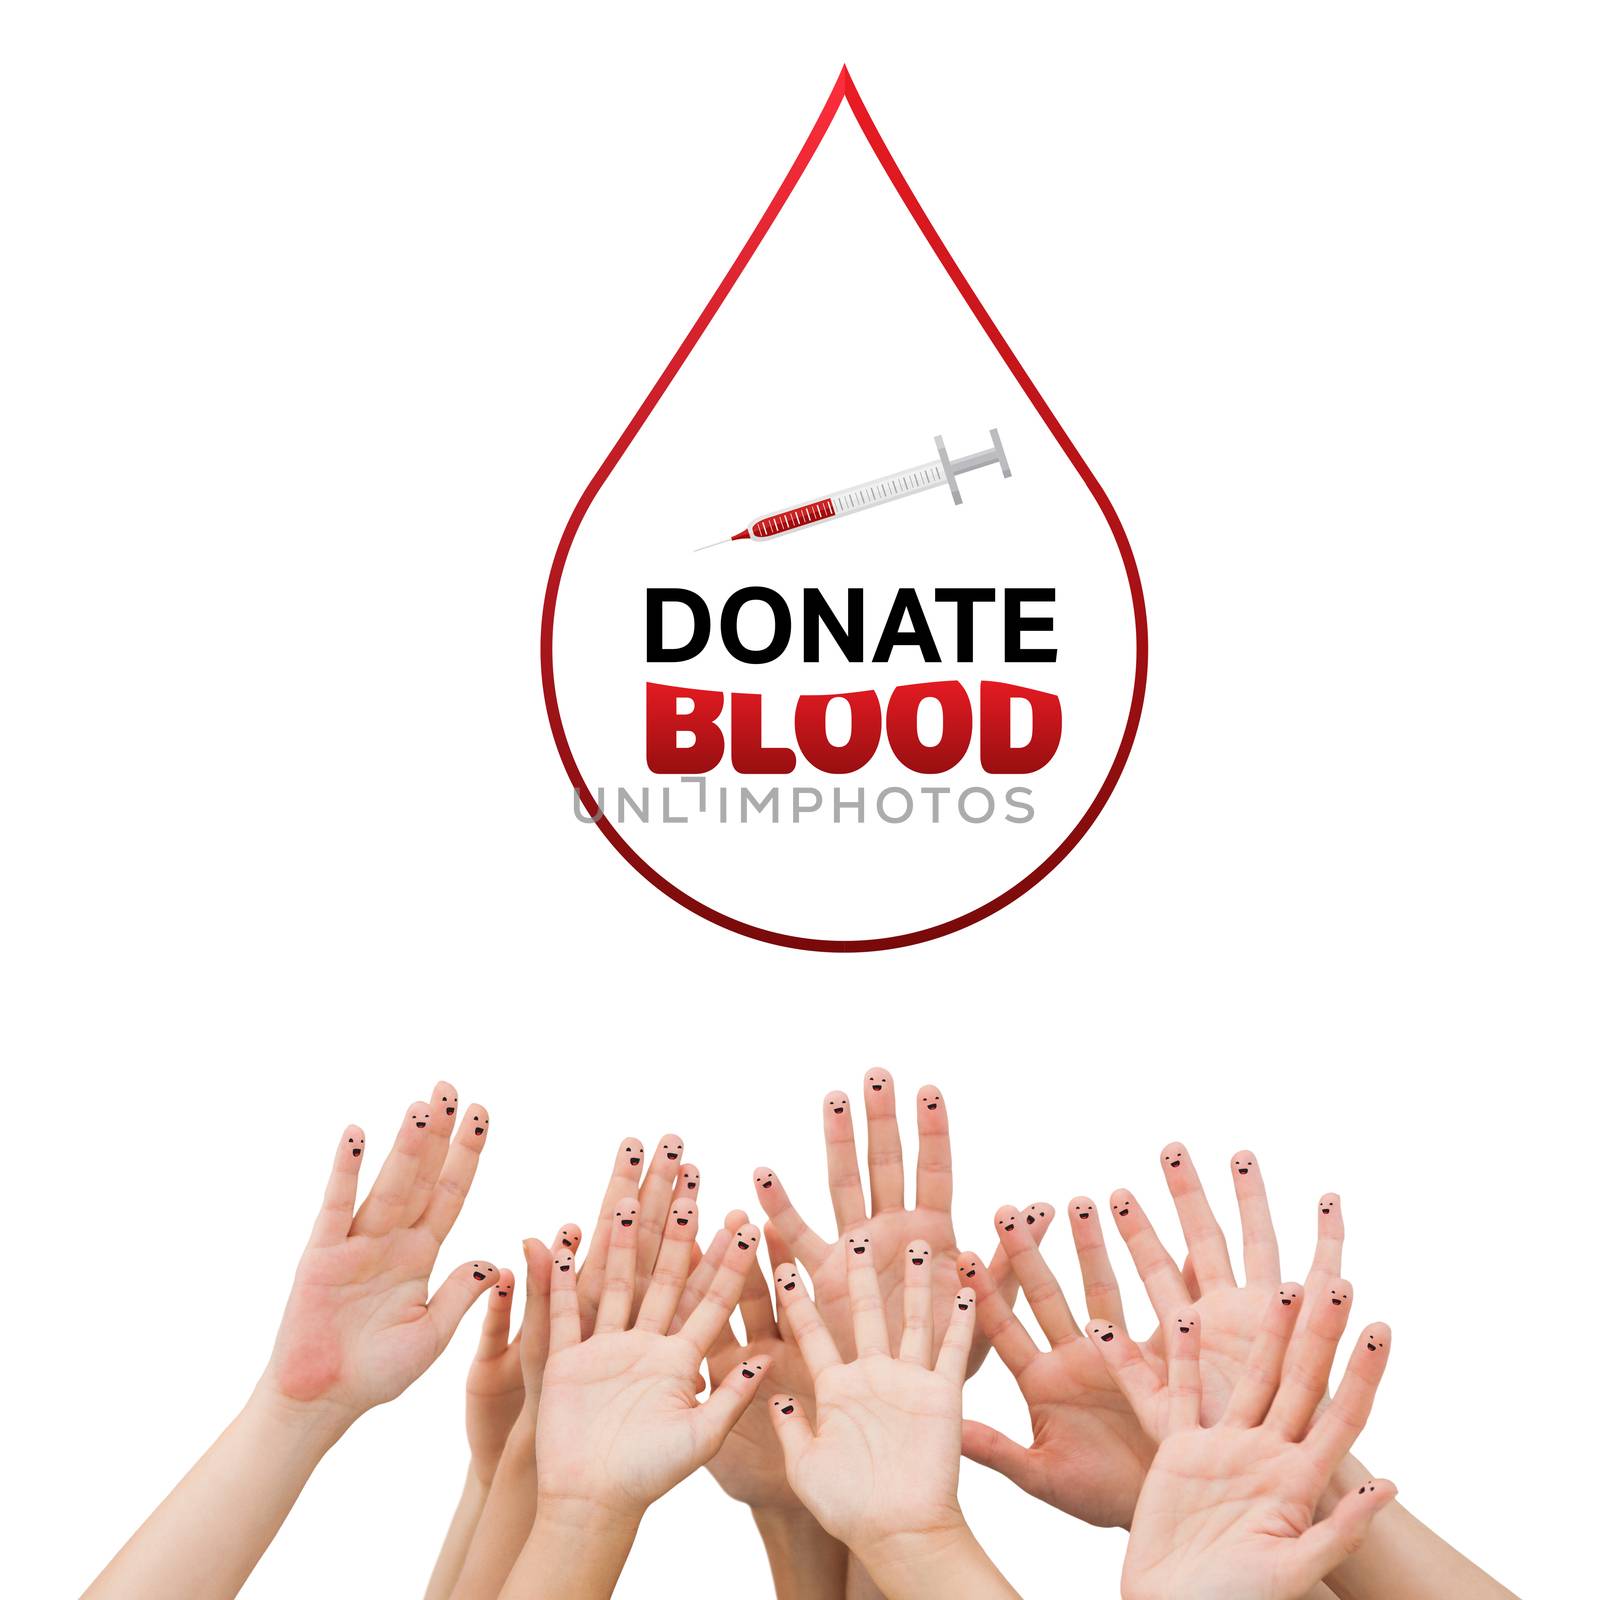 Composite image of donate blood by Wavebreakmedia